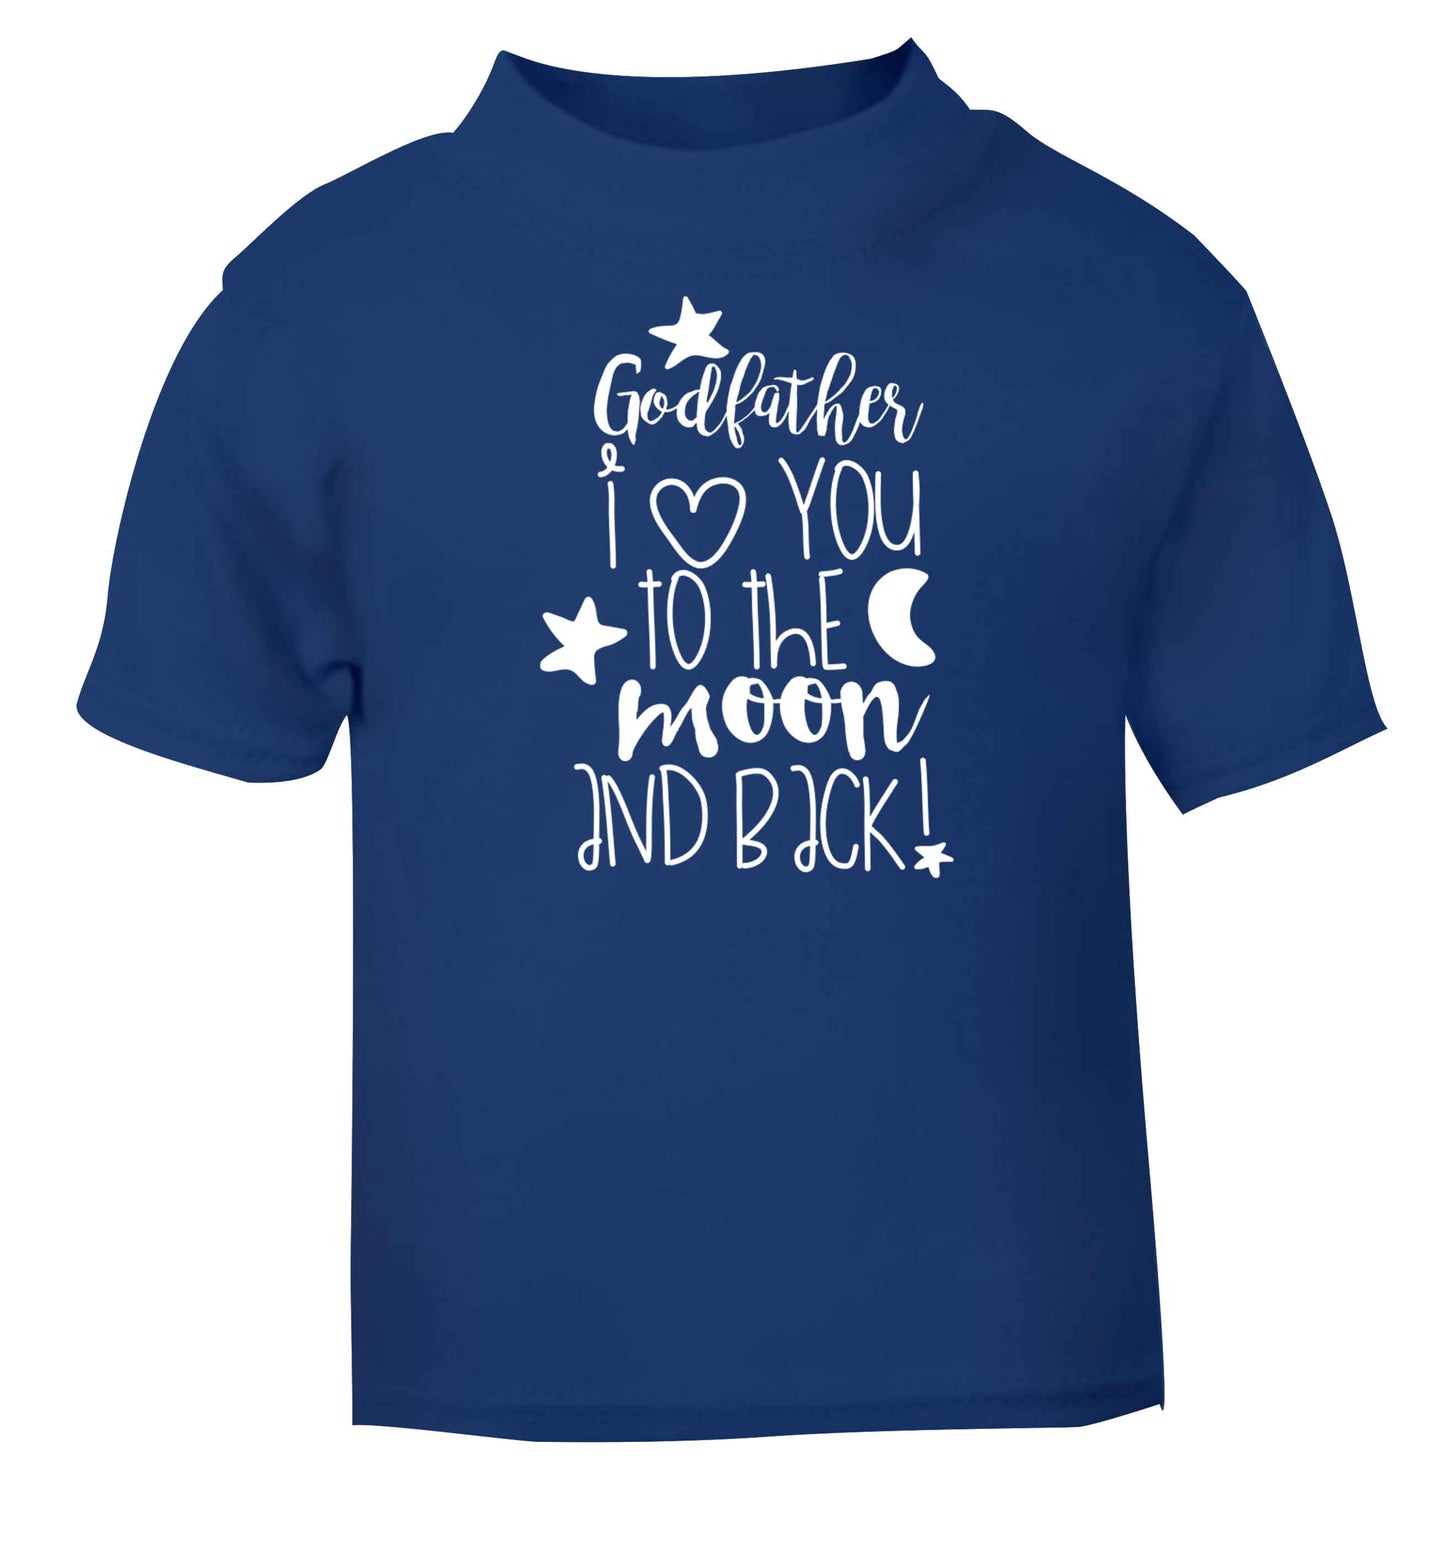 Godfather I love you to the moon and back blue baby toddler Tshirt 2 Years